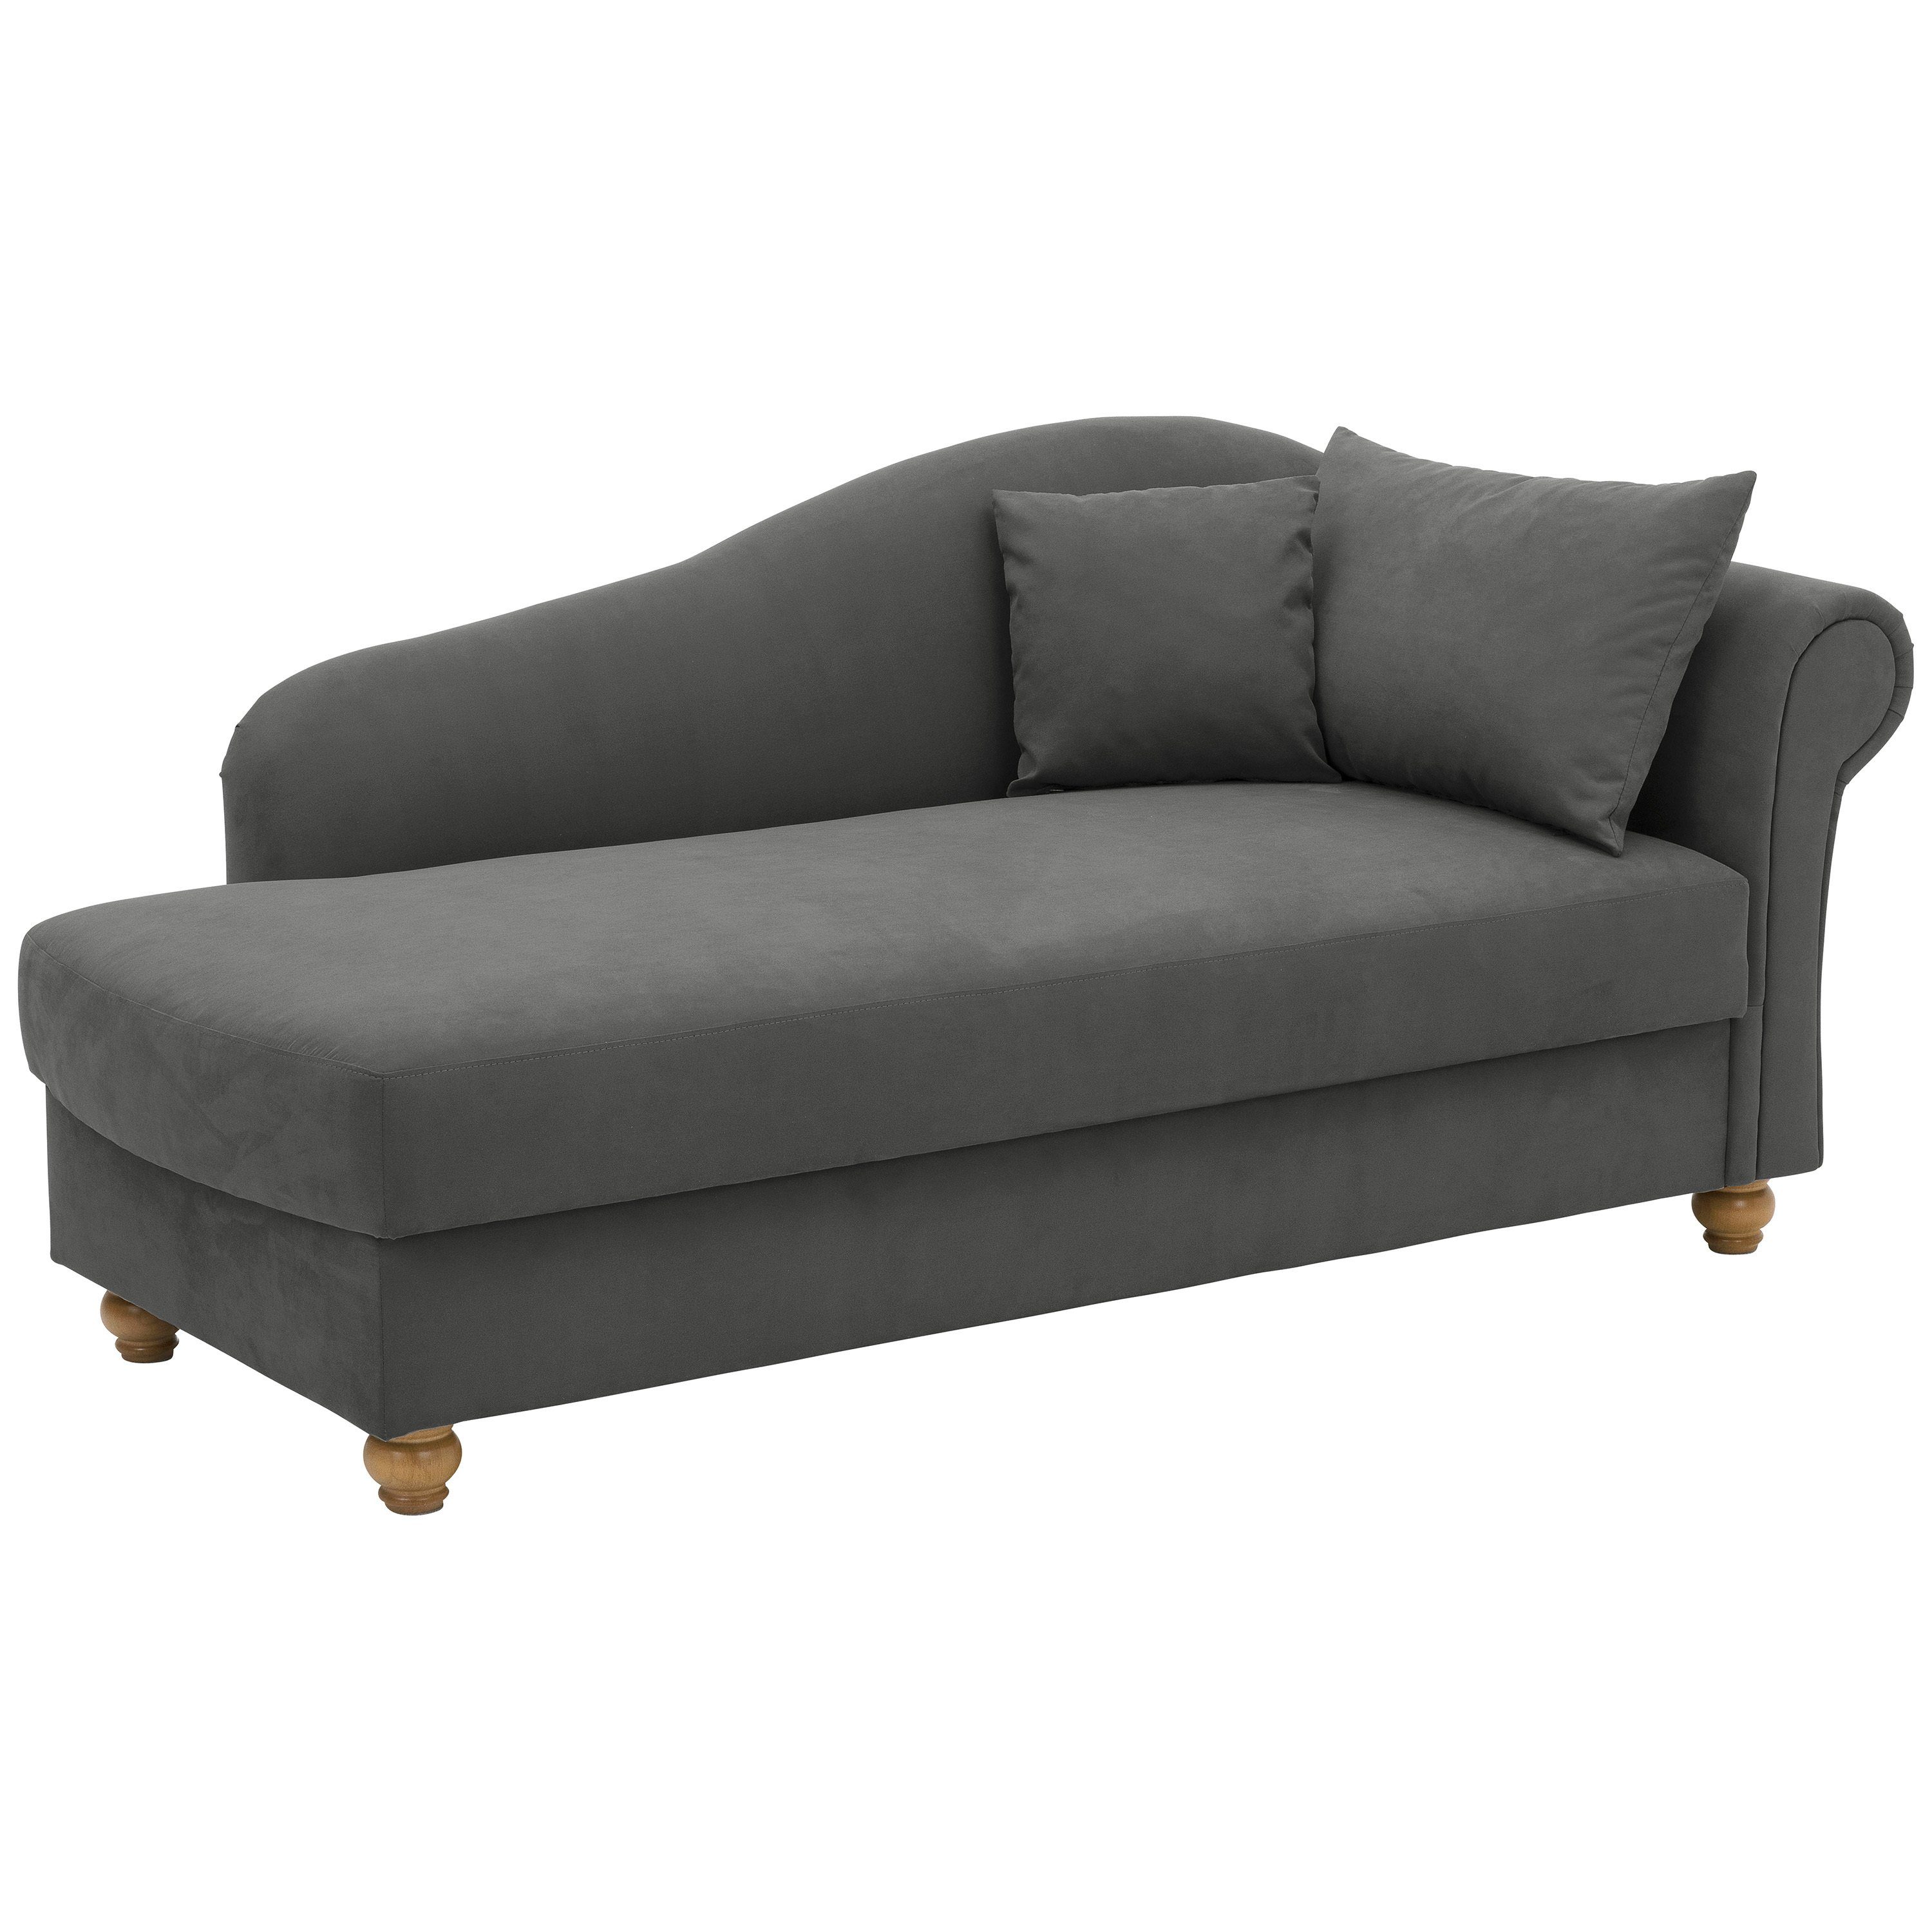 Max Winzer® Sofa Recamiere rechts Evelyn, Armlehne